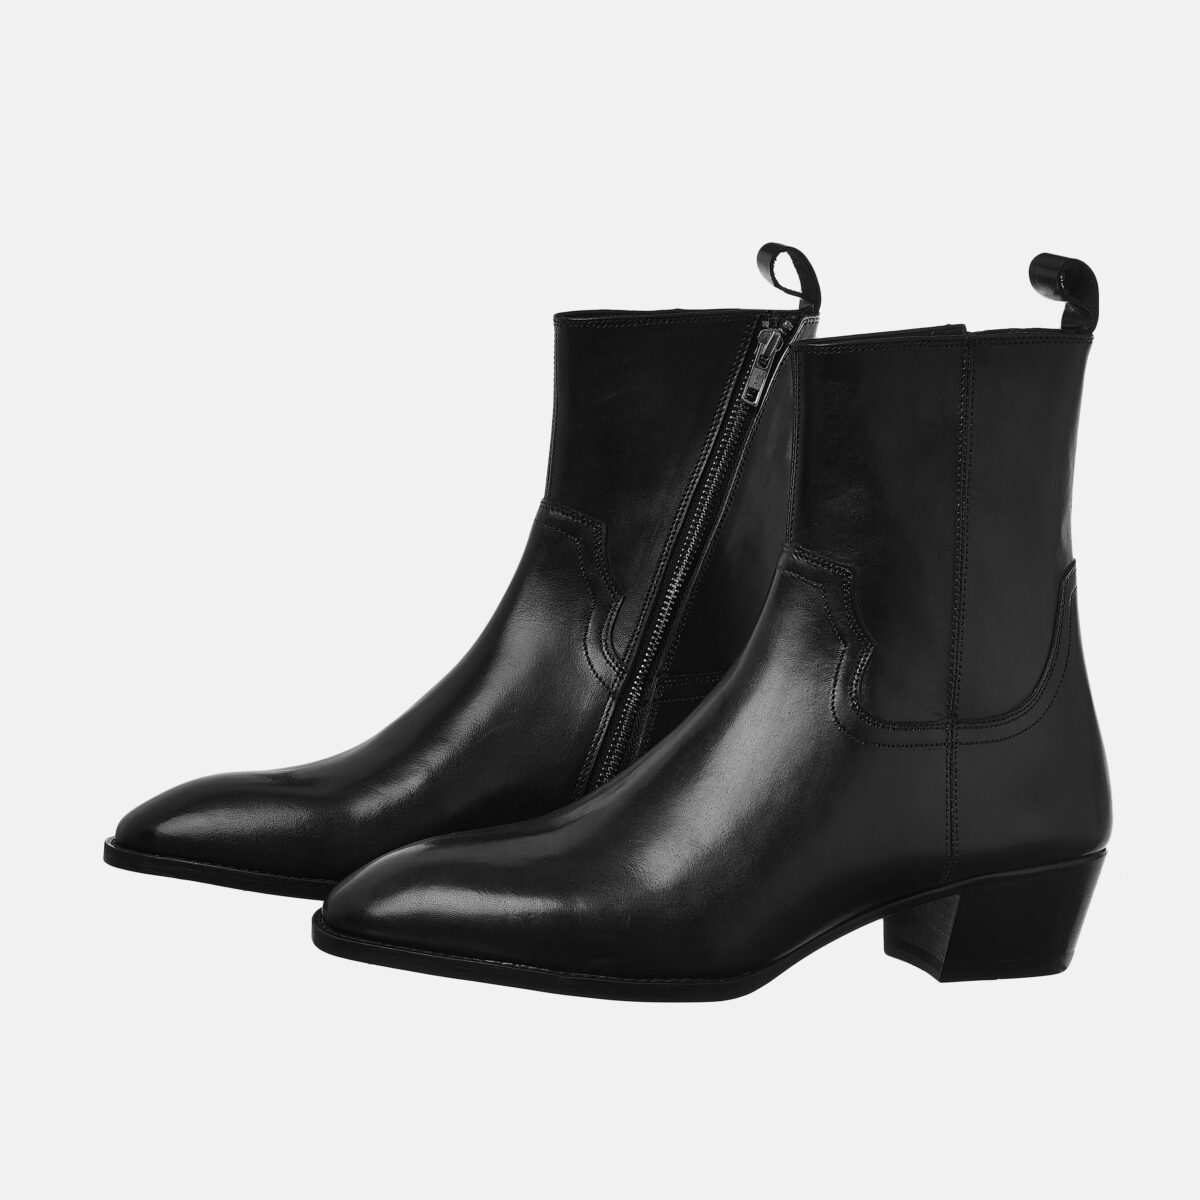 Rowan Leather Zip Boots In Black Leather Zip Boots In Black SS2020 1 1